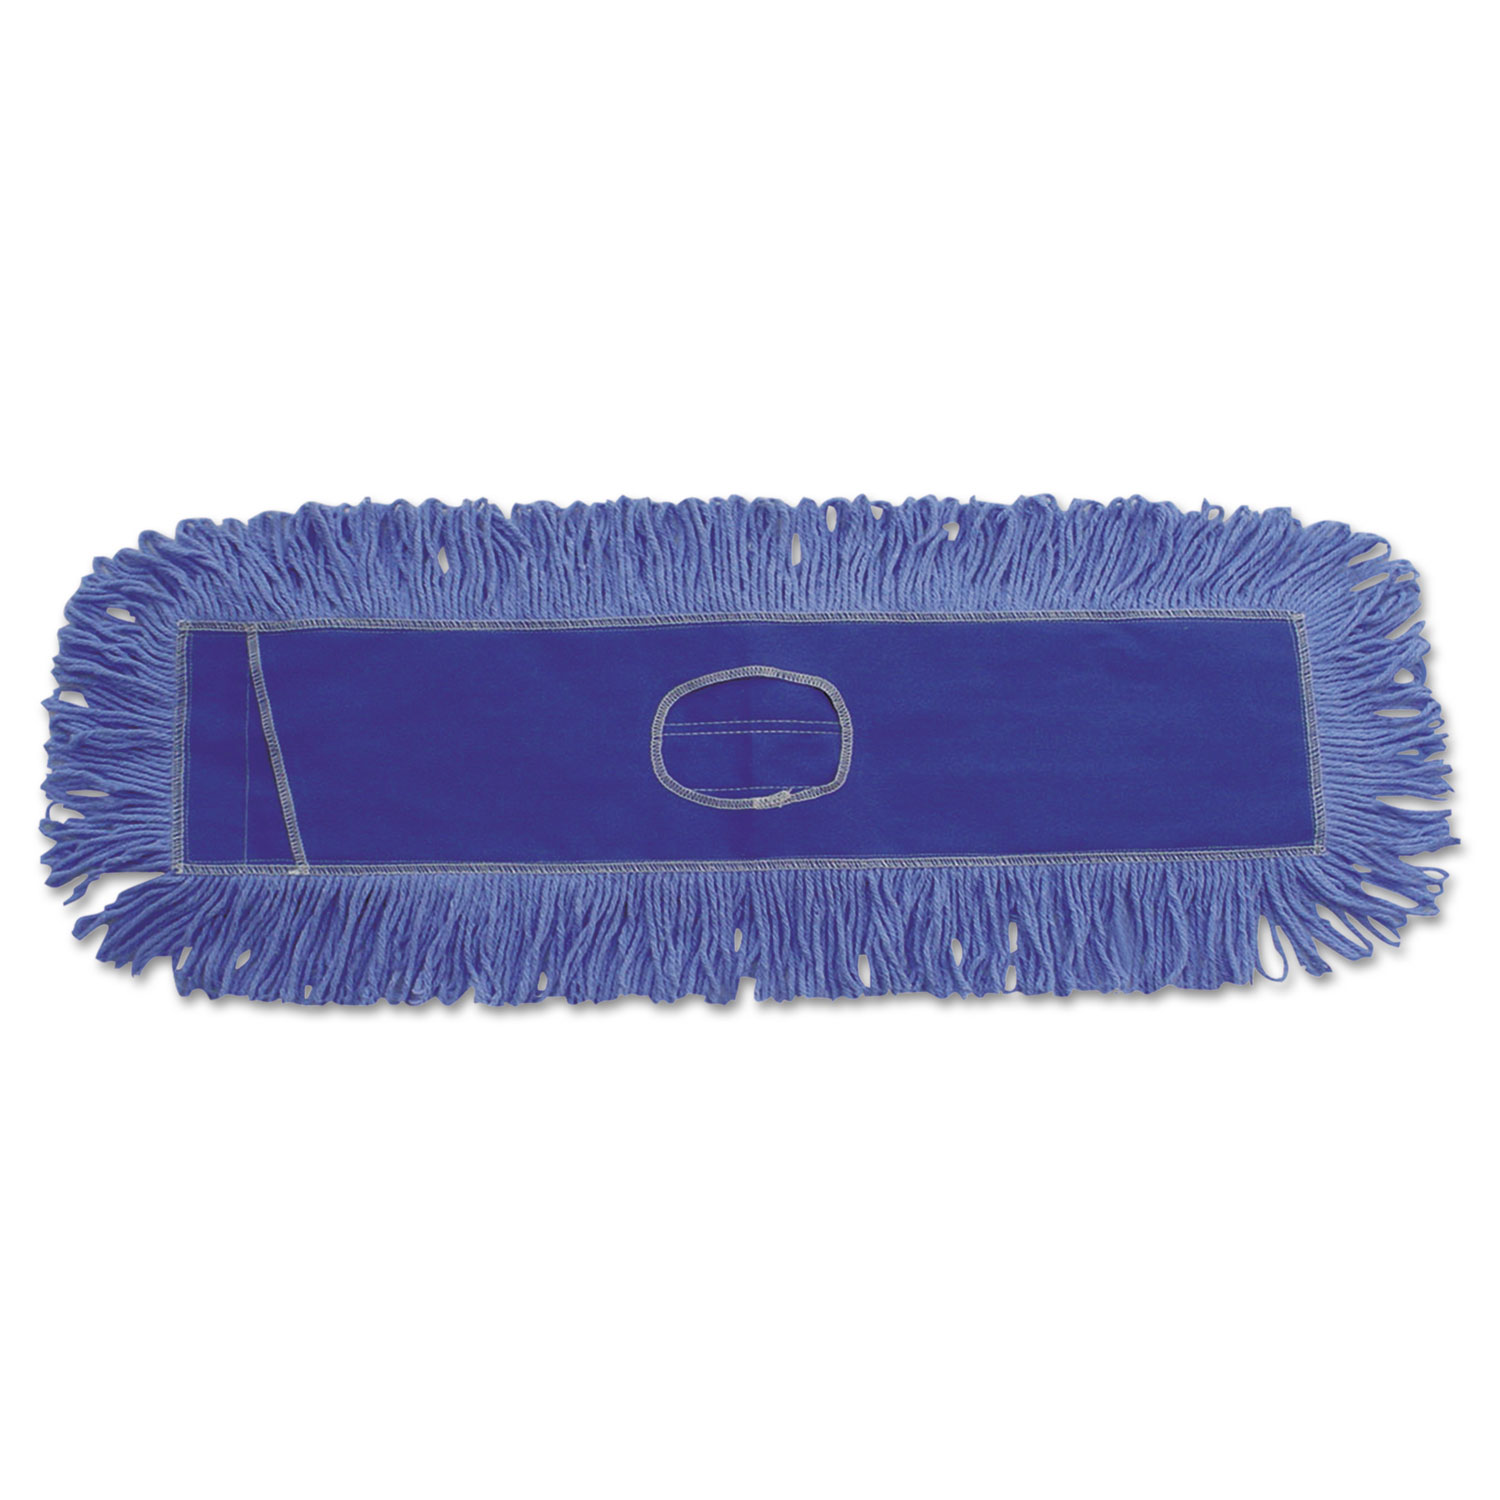 Dust Mop Head - Looped-End, Cotton/Synthetic, 24